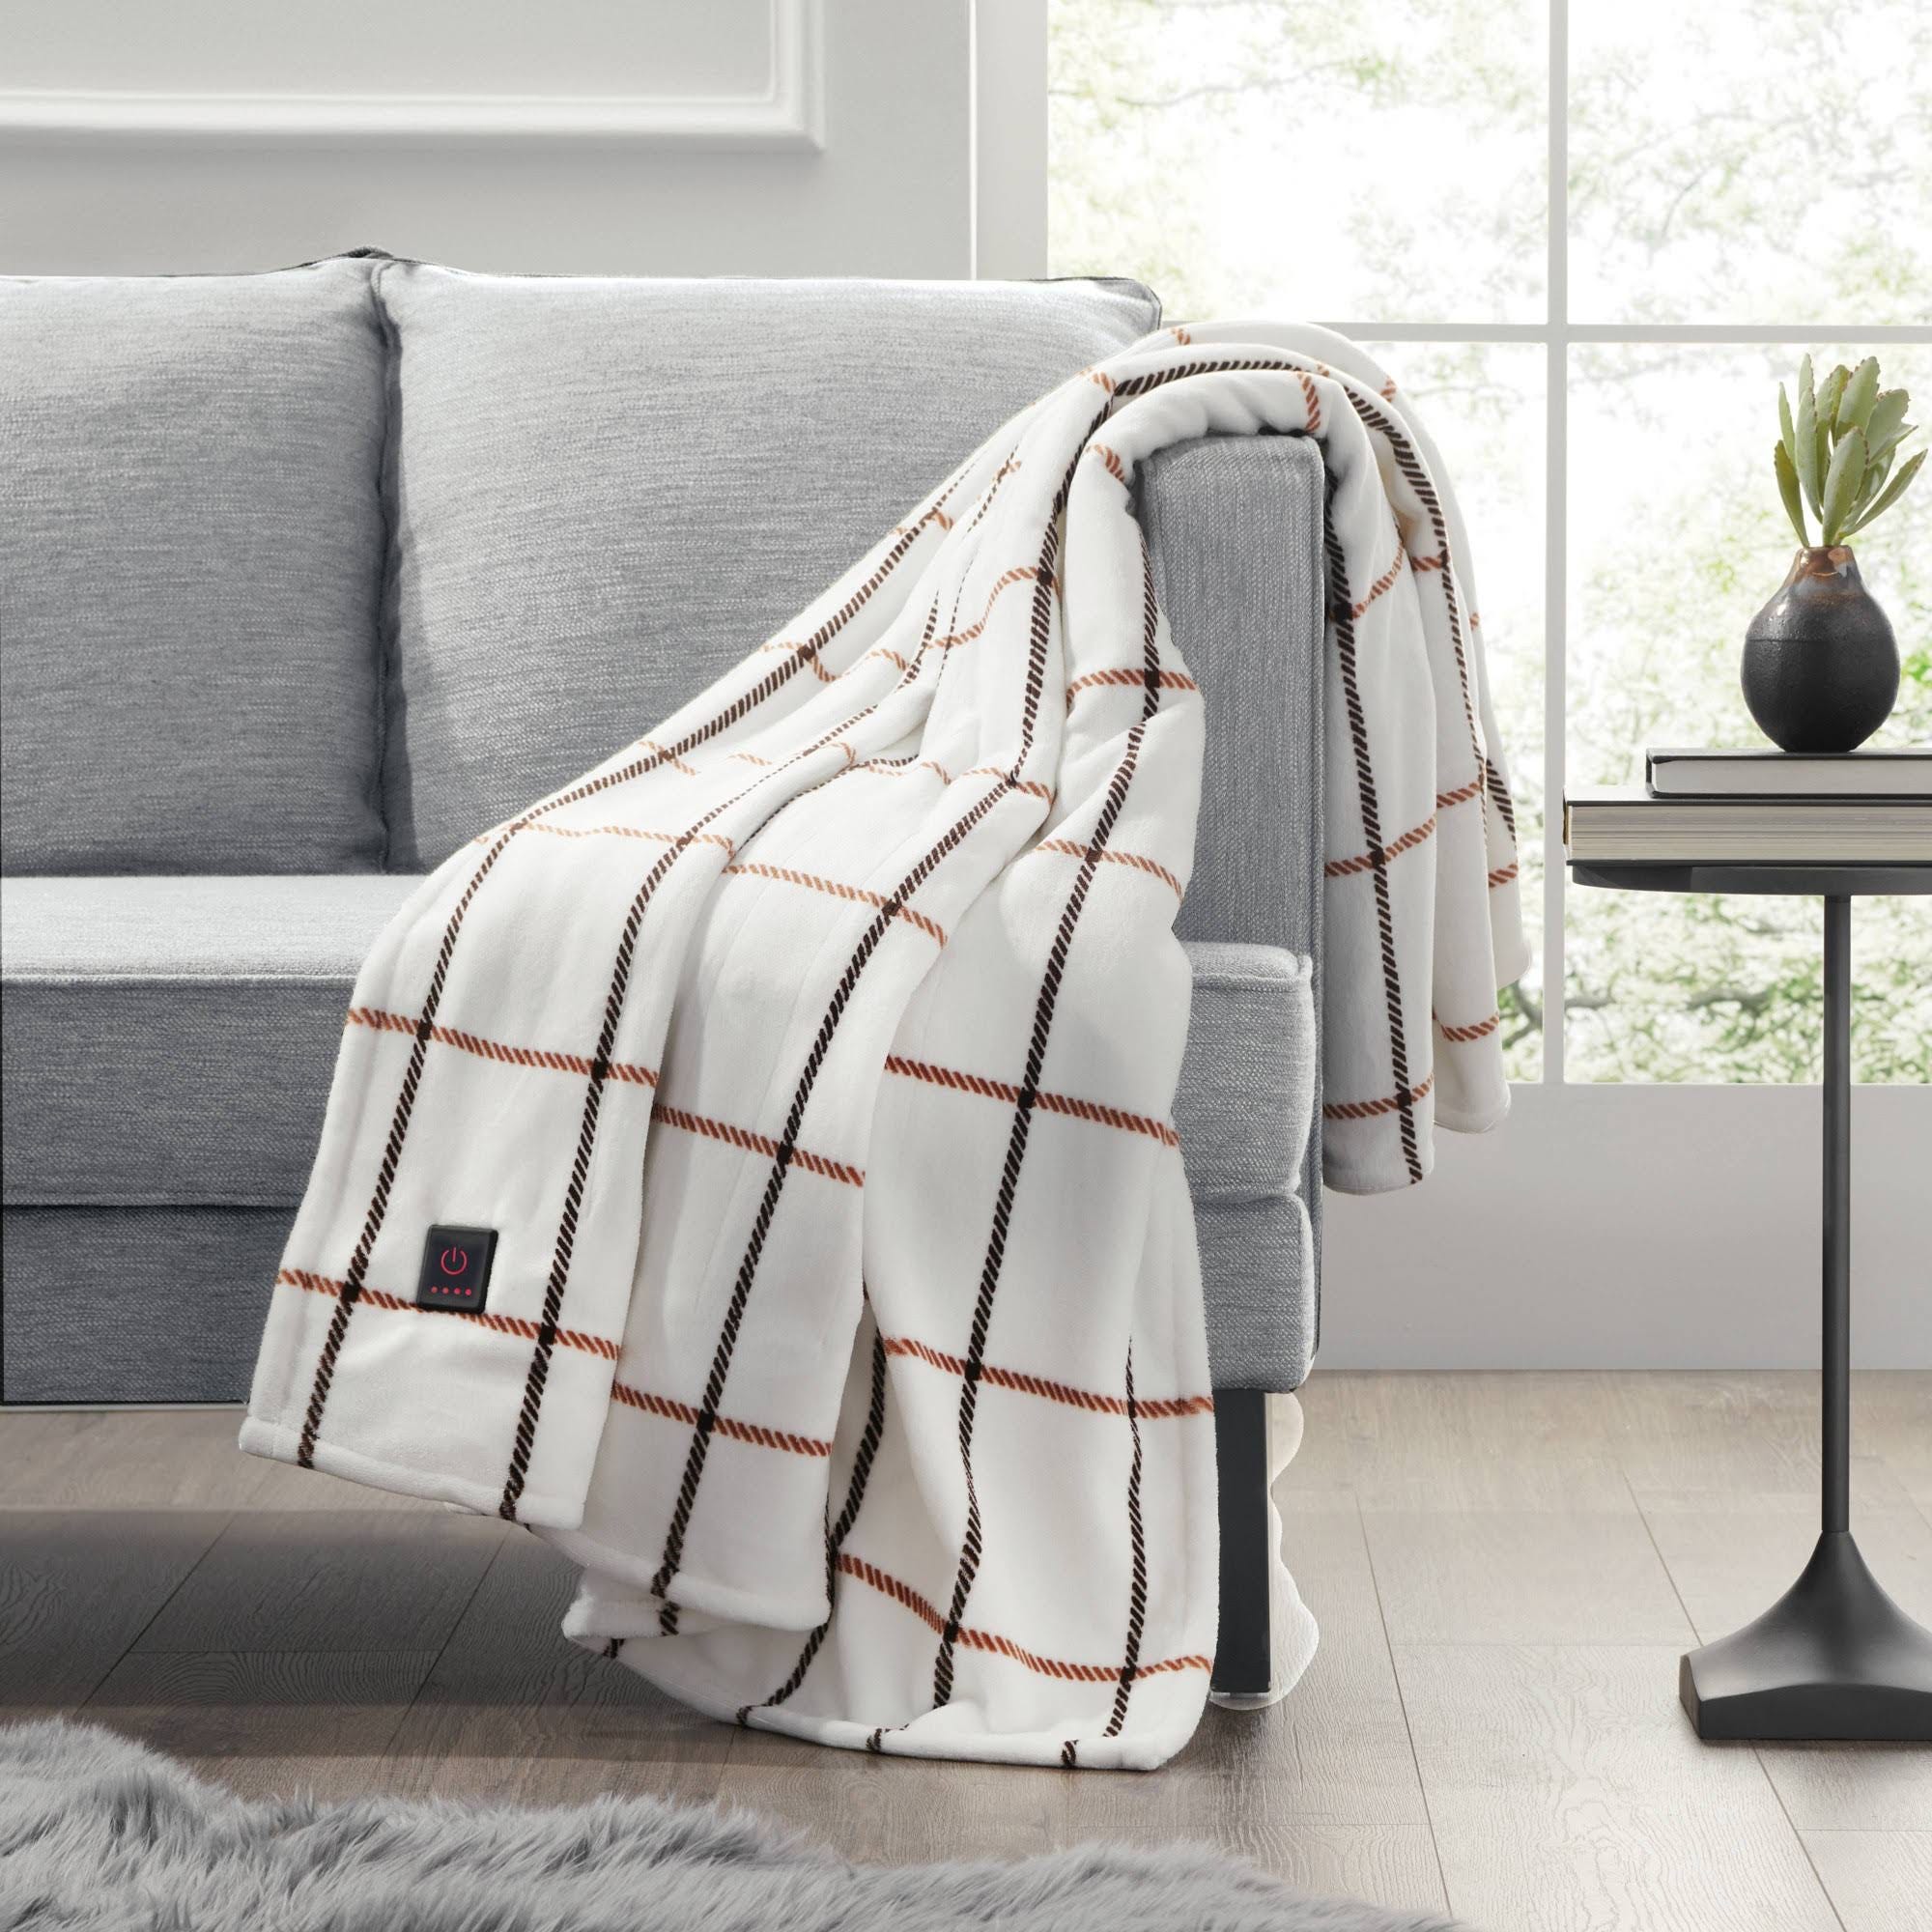 Brookstone Cozy Heated Throw Blanket - Warmth and Comfort | Image